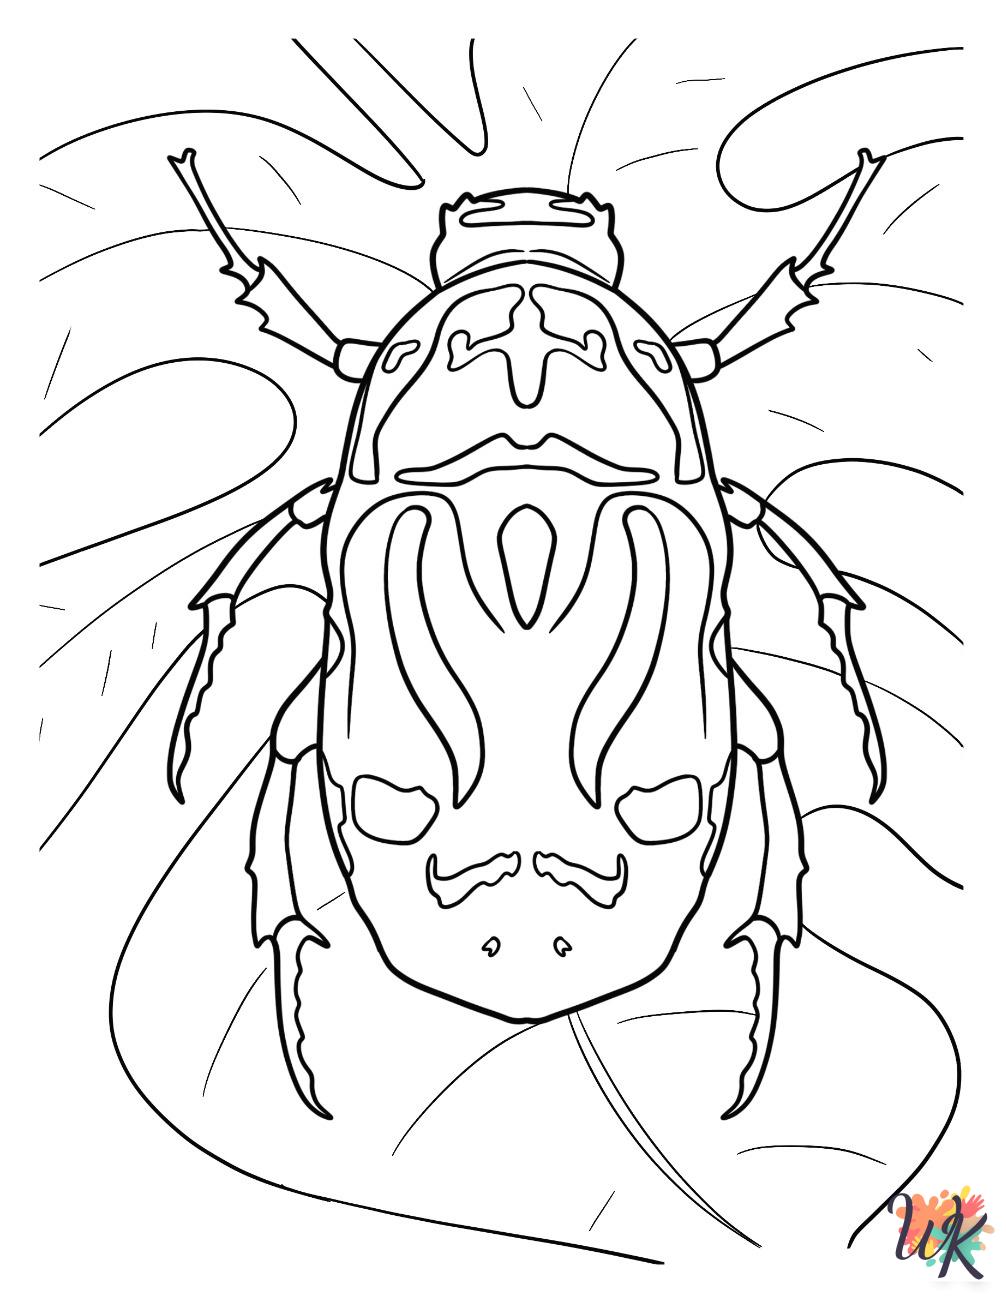 Beetle coloring pages free printable